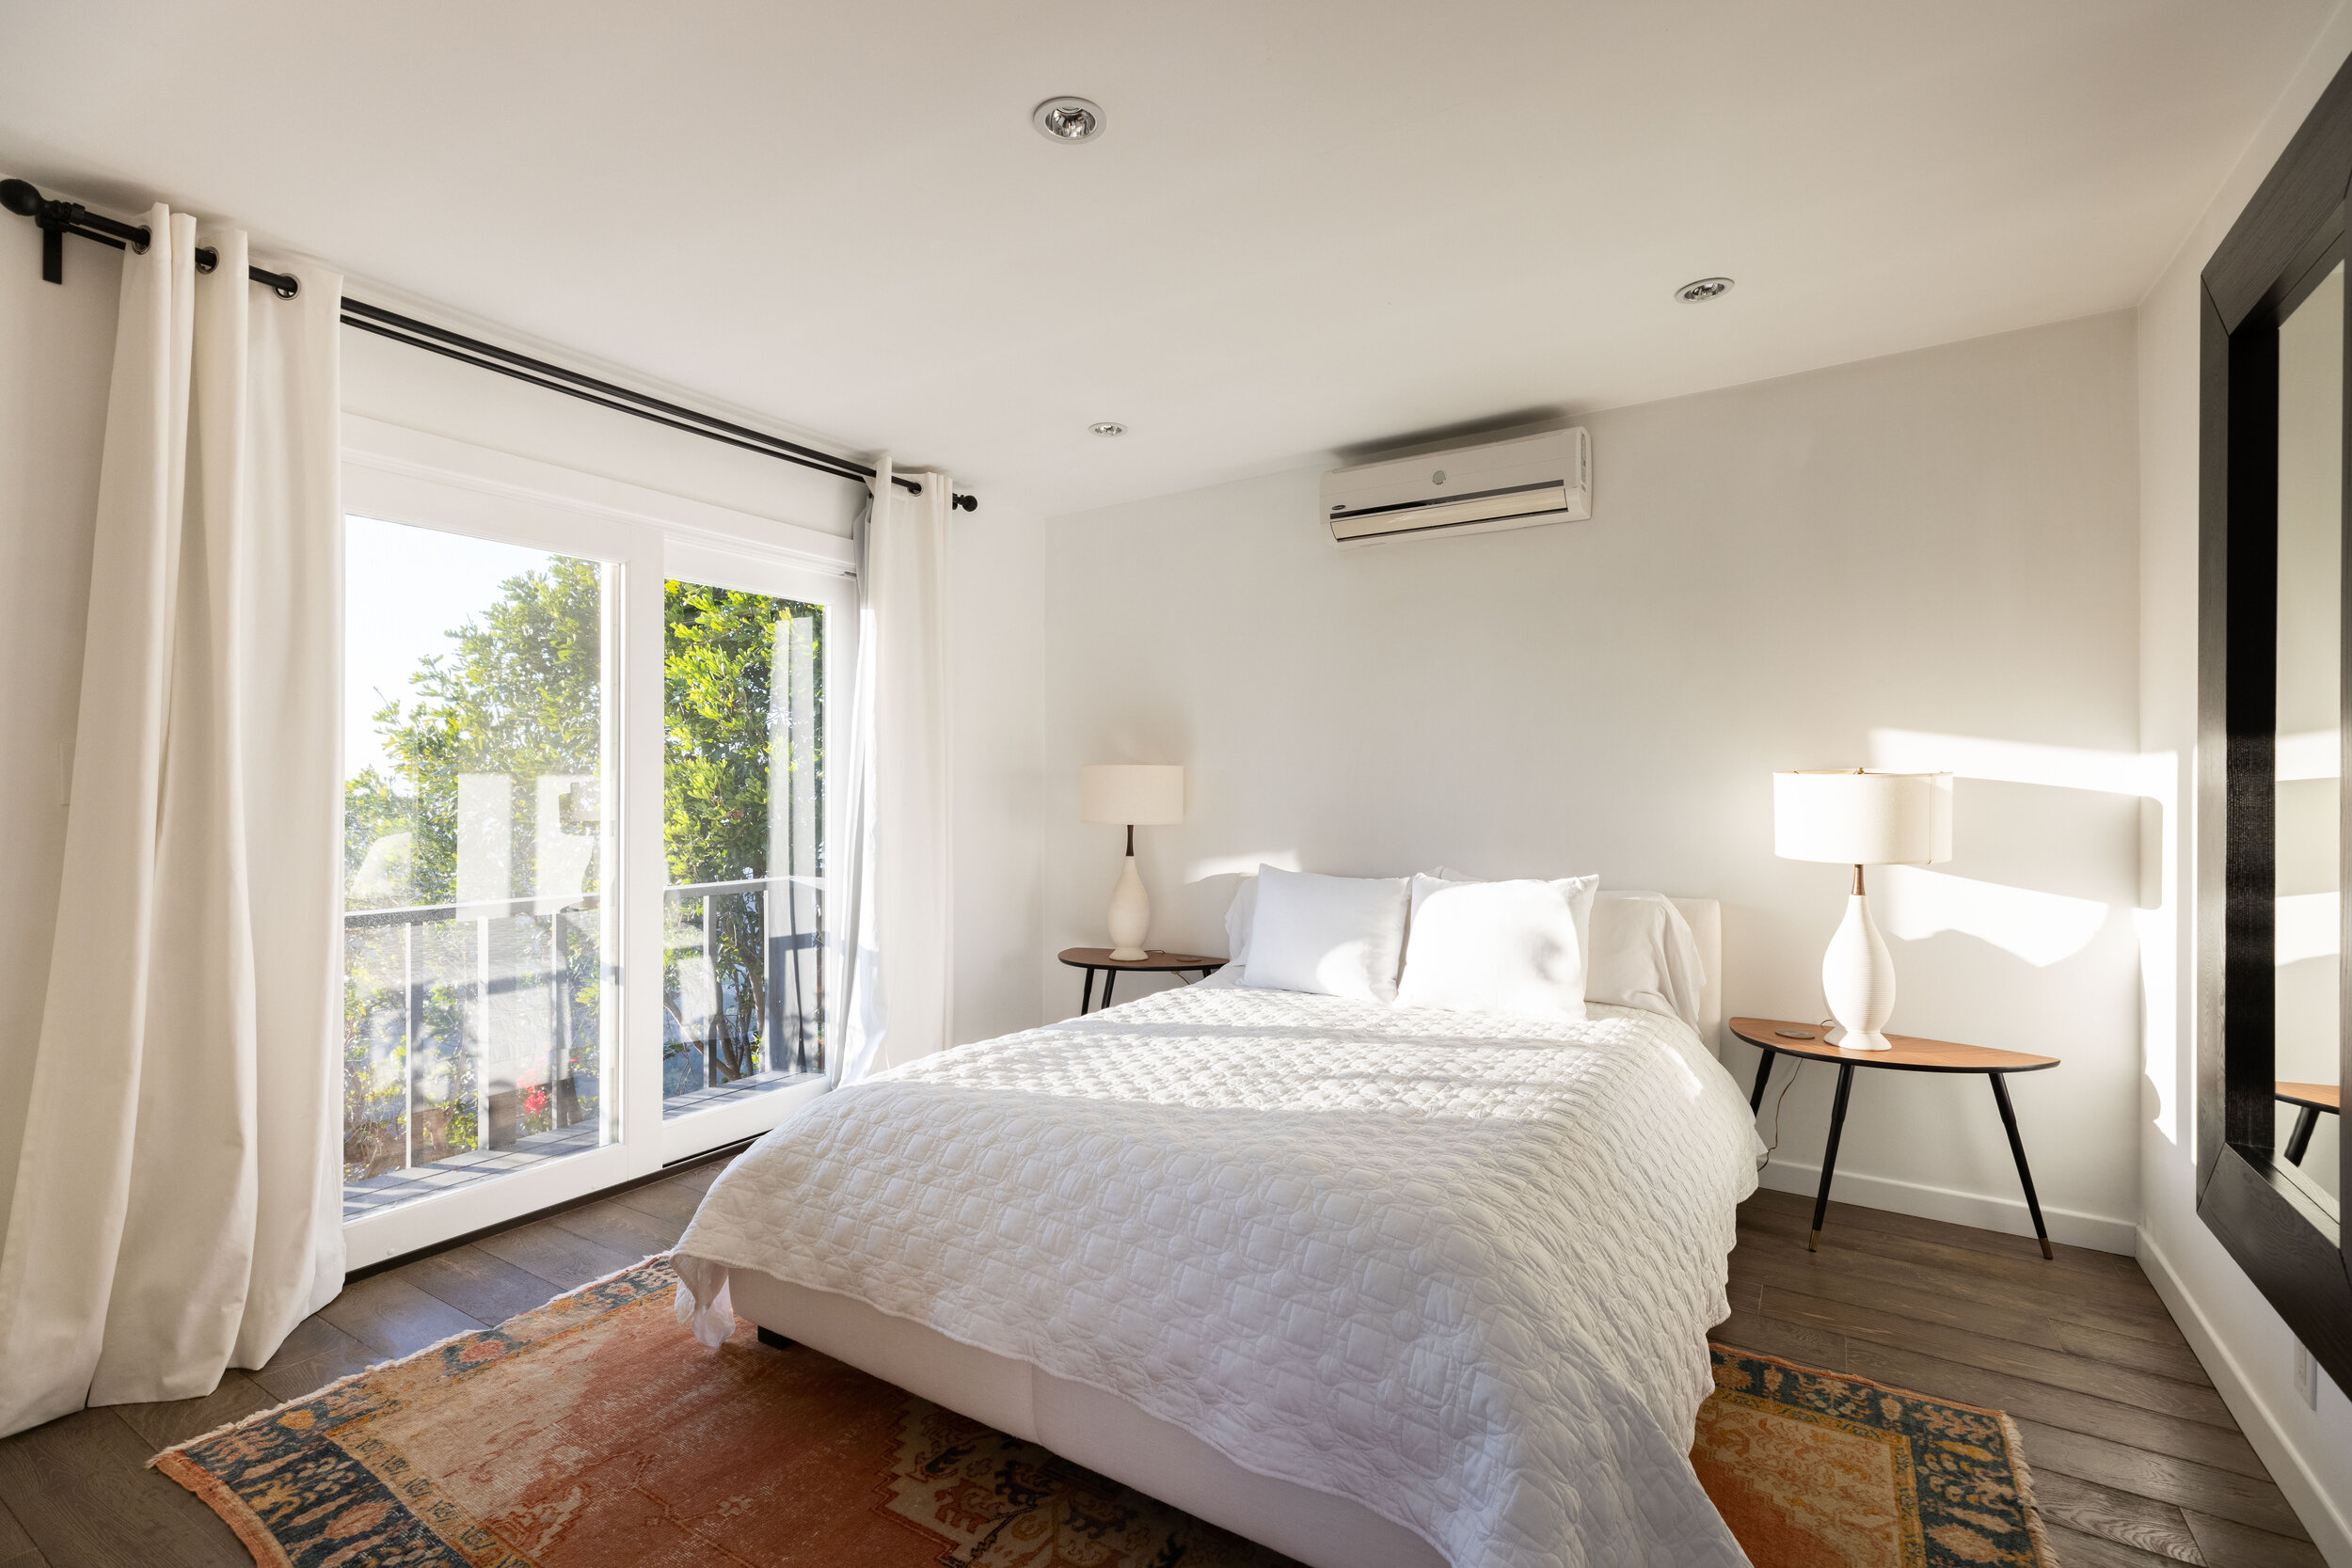 38 guest house bedroom windo view light REVISED.jpg